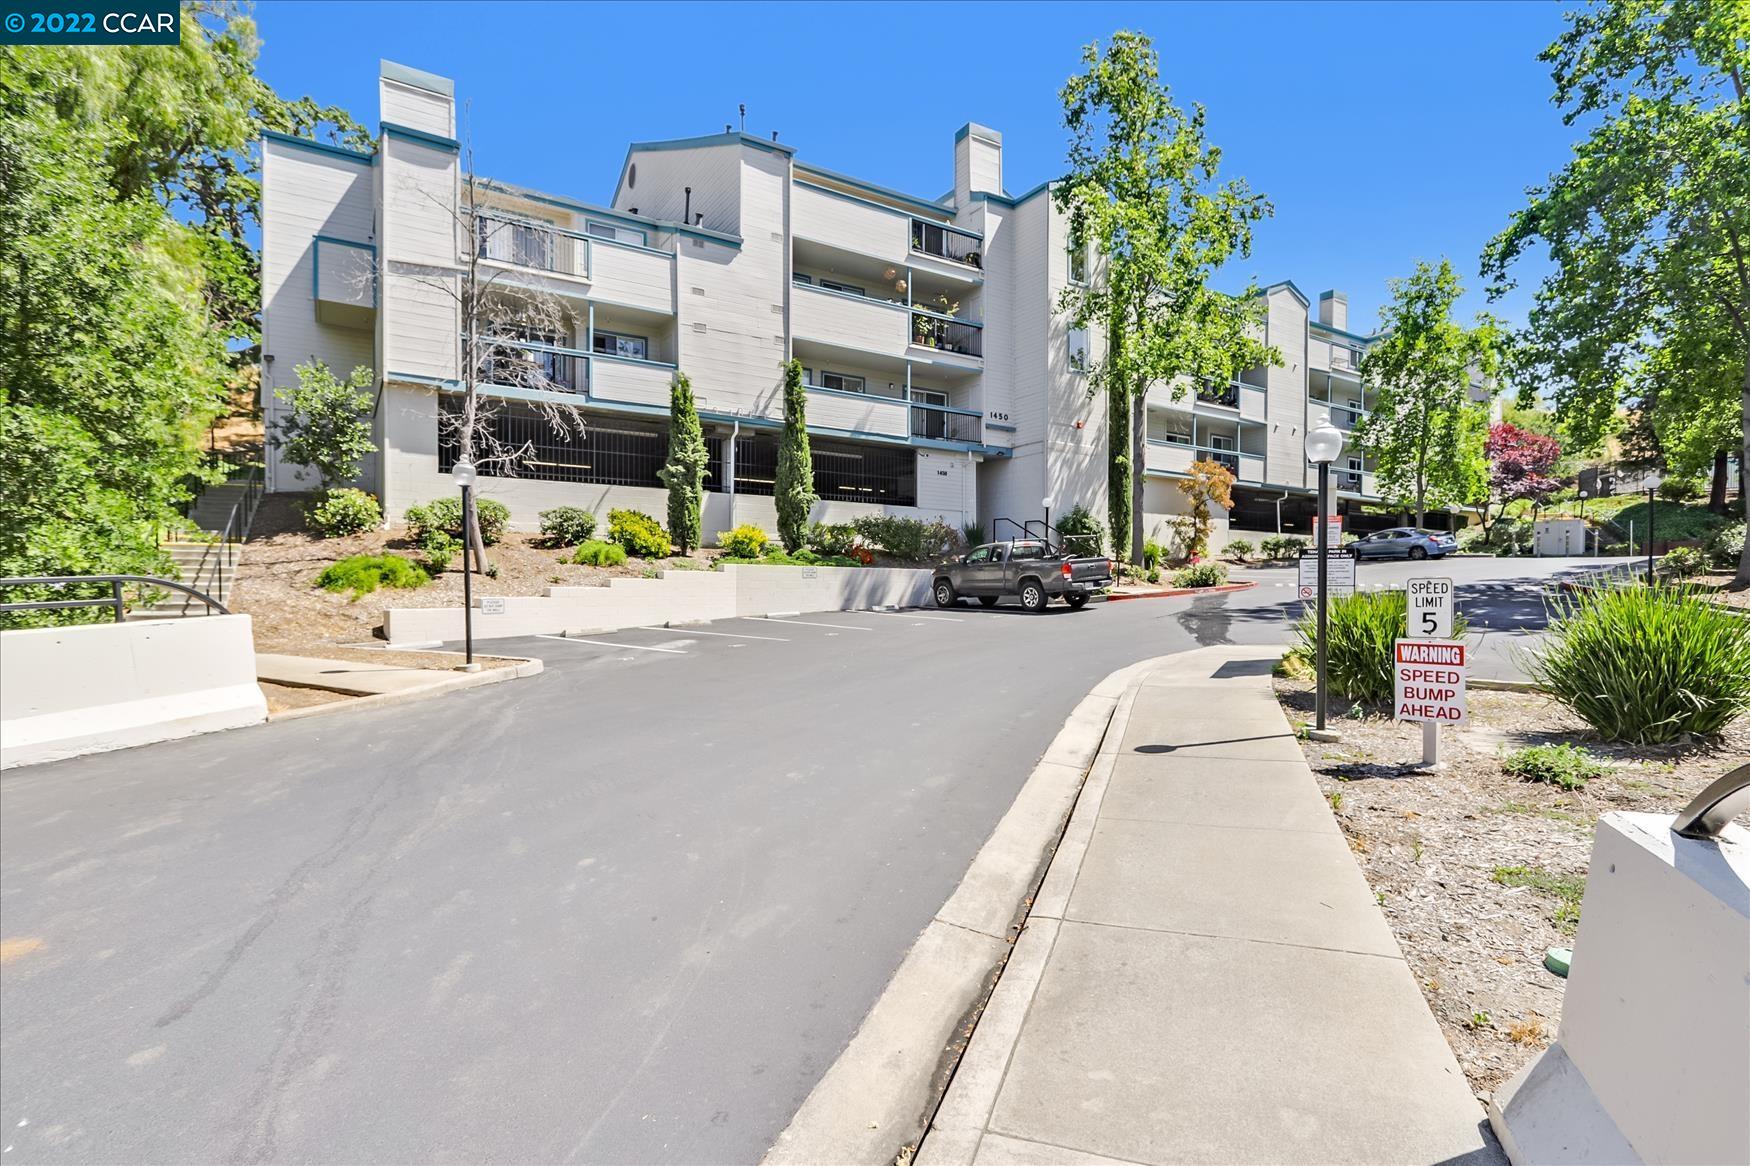 This unit is nestled in a quiet corner of Concord next to Newhall Park. You can start your day with the great views of the nearby mountains and greenbelt from the 3rd floor balcony, and them go on a nature hike through Newhall Park. After that, cool down with a dip in the oversize pool just next to this building.  Finally, walk over to the nearby restaurants for breakfast or lunch. The unit is in an enchanted complex located walking distance to shopping, restaurants, etc.  It features easy access to both the Concord and Pleasant Hill BART Stations.  It is also just minutes from the freeway.  The cozy unit features an updated kitchen with granite countertops and a stone-tile floor in the kitchen.  It conveniently has 2 bathrooms, and the living room features a beautiful fireplace.  Come see this one before it’s gone.